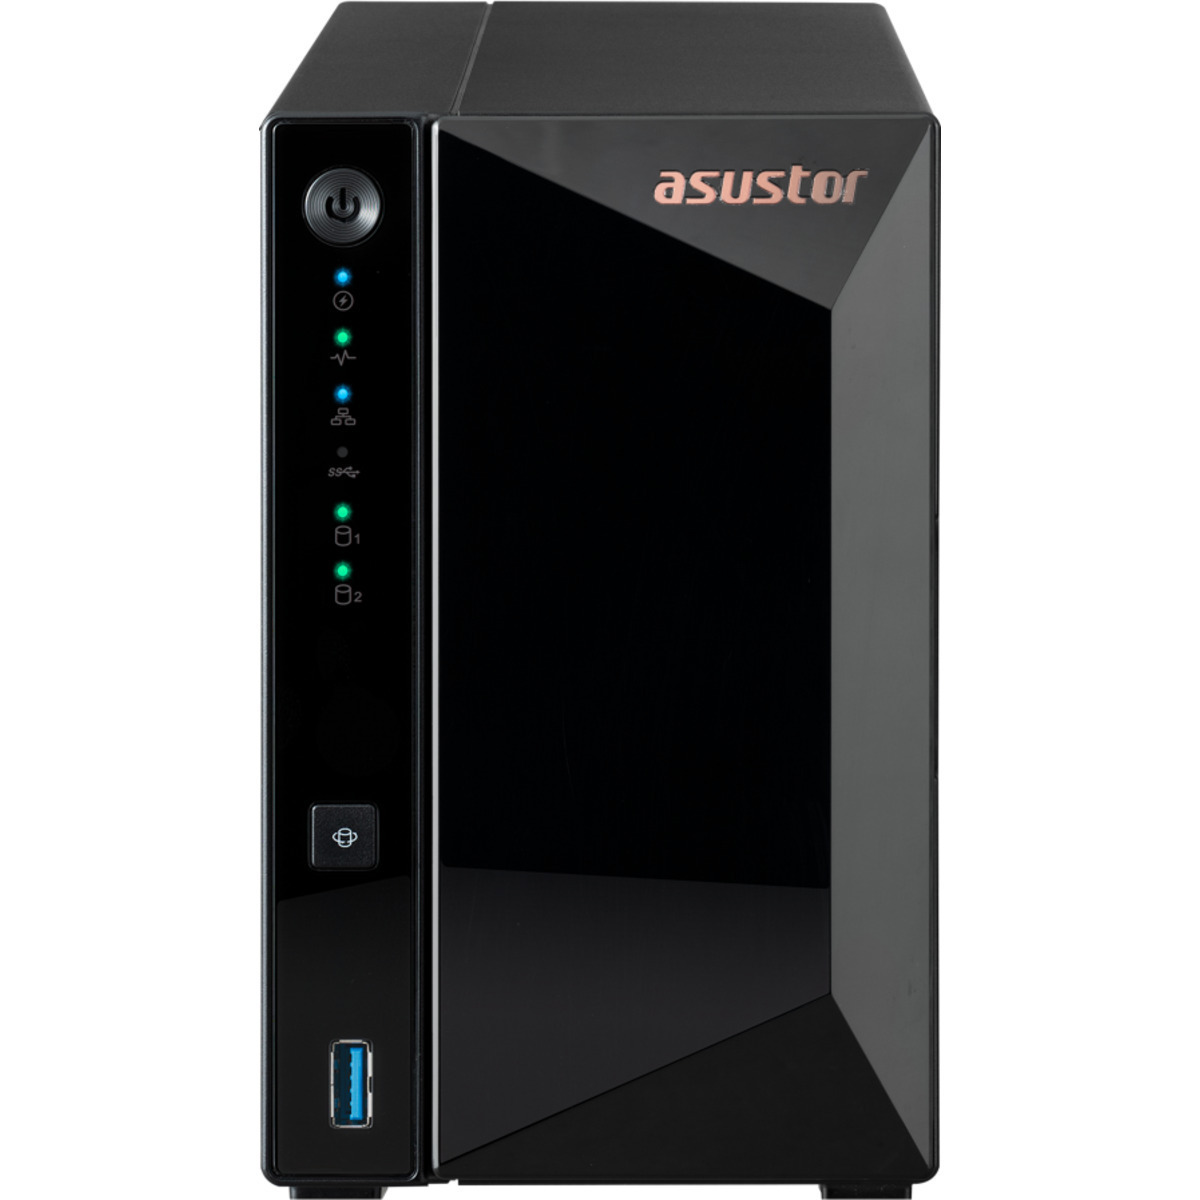 ASUSTOR DRIVESTOR 2 Pro AS3302T 20tb 2-Bay Desktop Personal / Basic Home / Small Office NAS - Network Attached Storage Device 2x10tb Seagate IronWolf Pro ST10000NT001 3.5 7200rpm SATA 6Gb/s HDD NAS Class Drives Installed - Burn-In Tested - ON SALE DRIVESTOR 2 Pro AS3302T